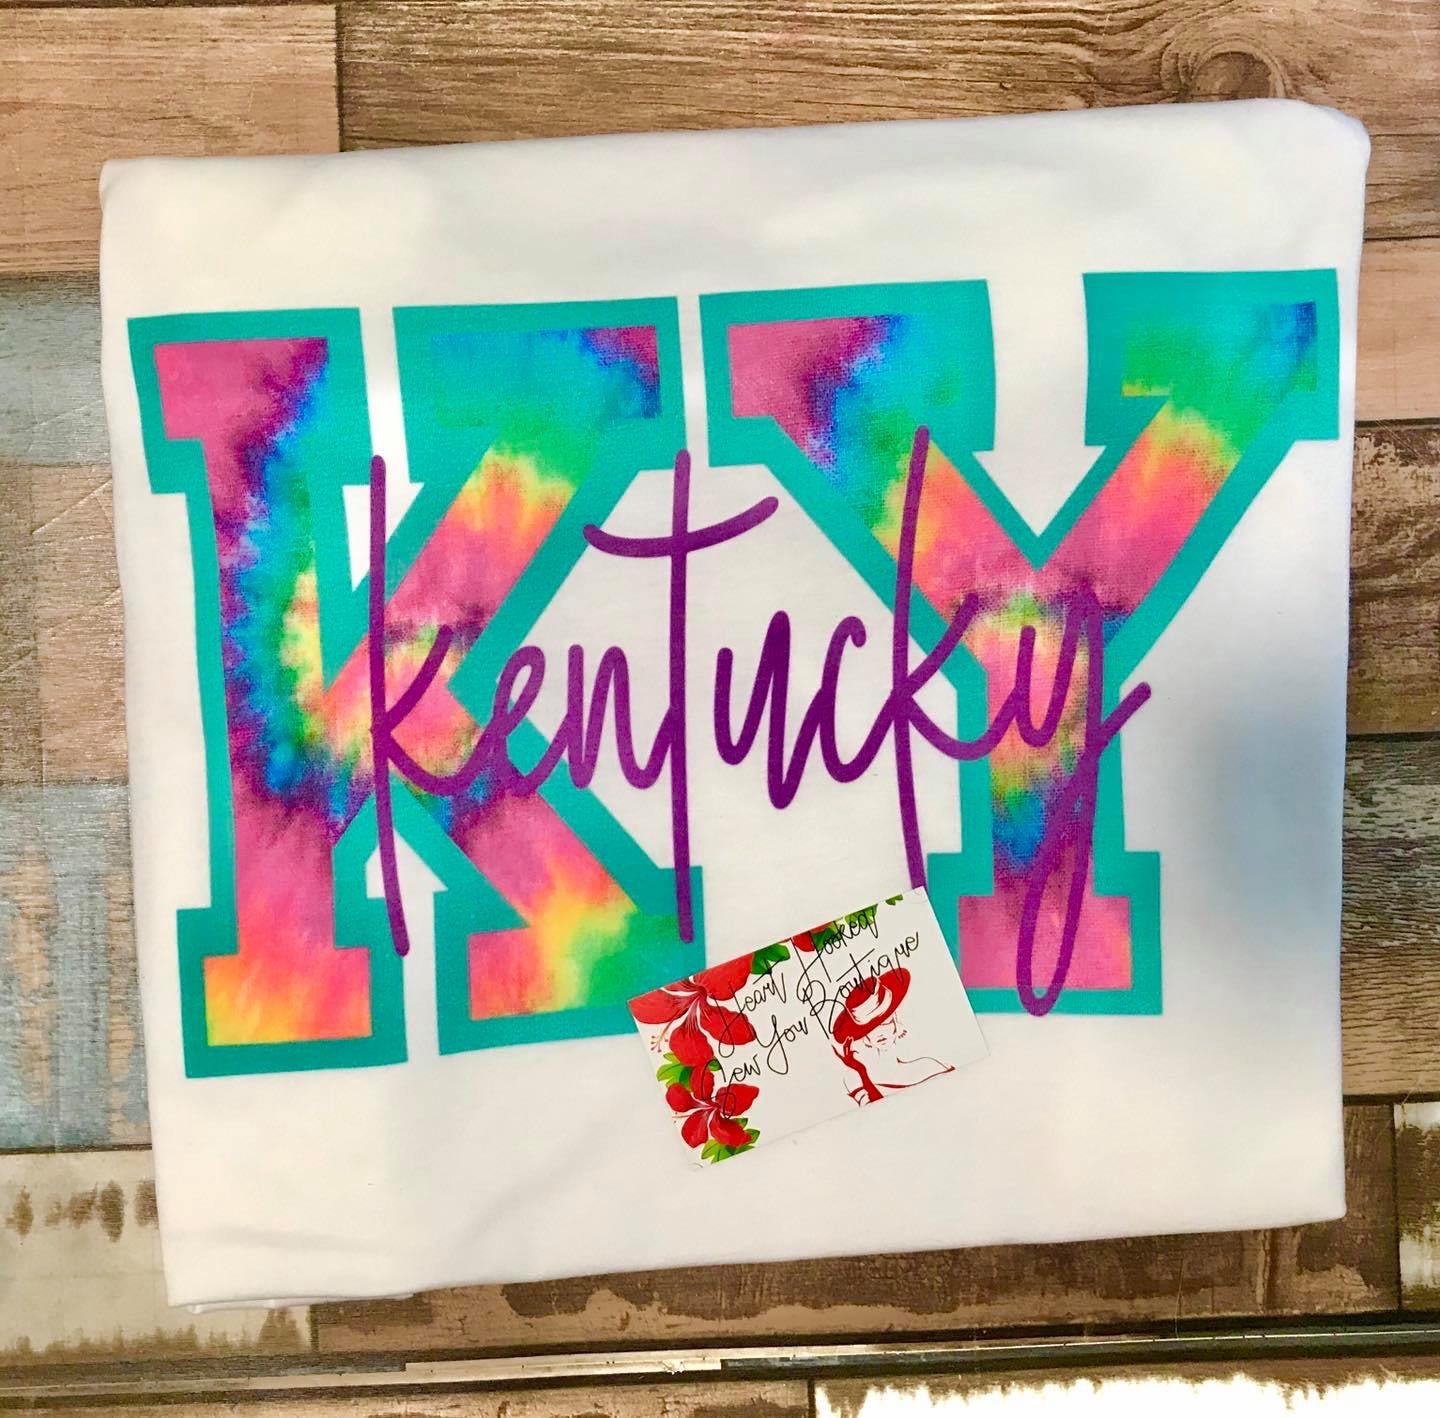 KY Kentucky Tie Dye *Sublimated*